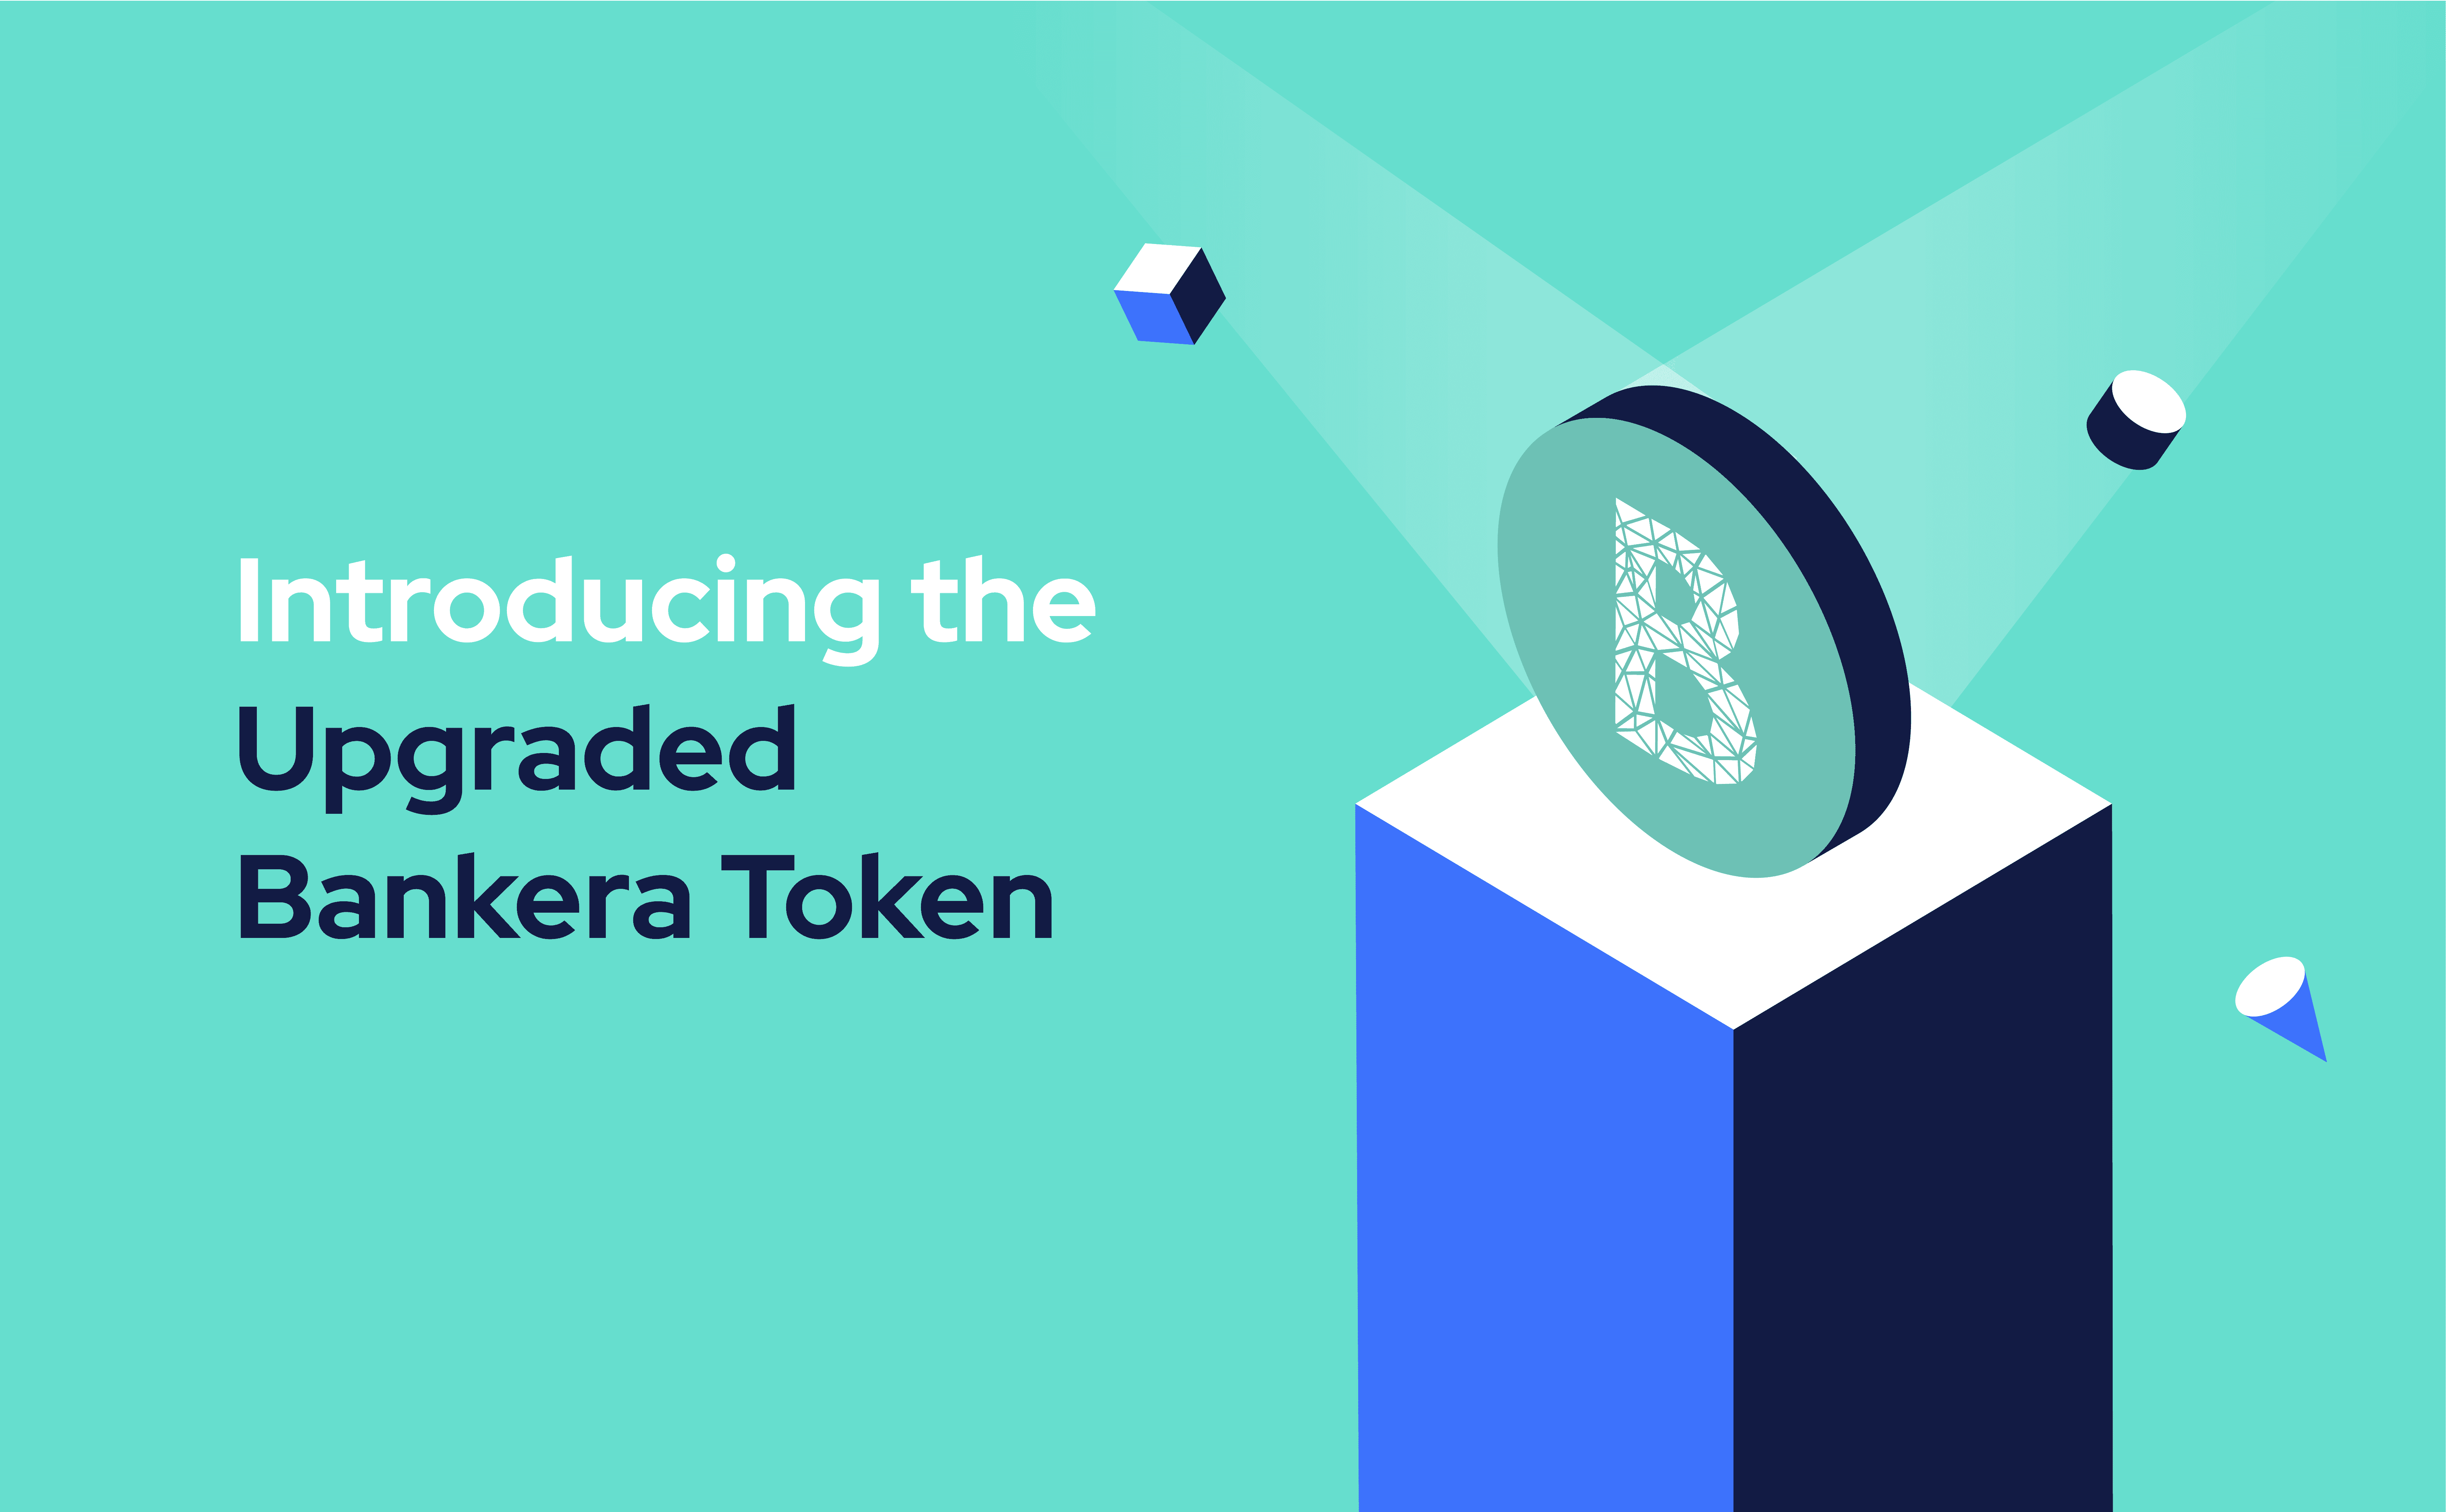 Introducing the Upgraded Bankera Token